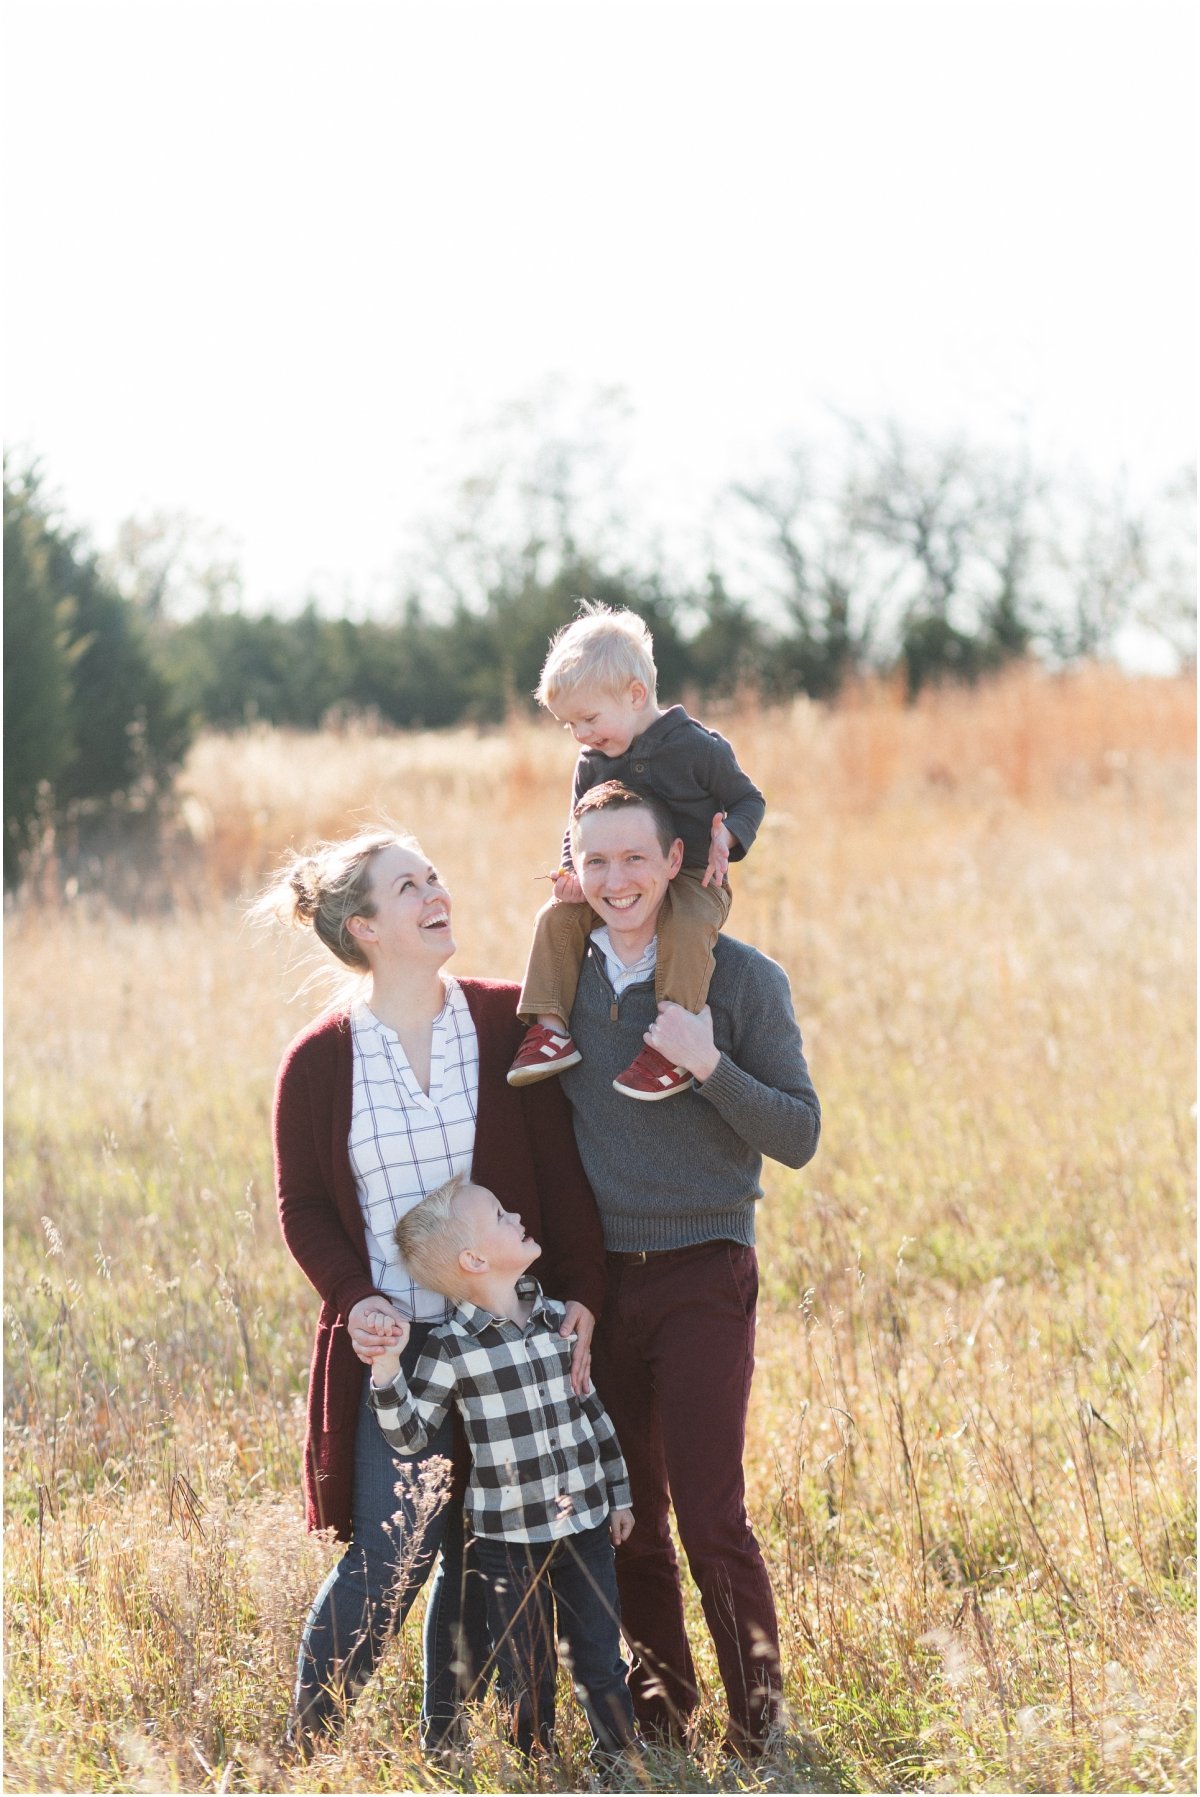 Shawnee_Mission_Park_Family_Session_By_Bianca_Beck_Photography_Kansas_City_Wedding_Photographer__0006